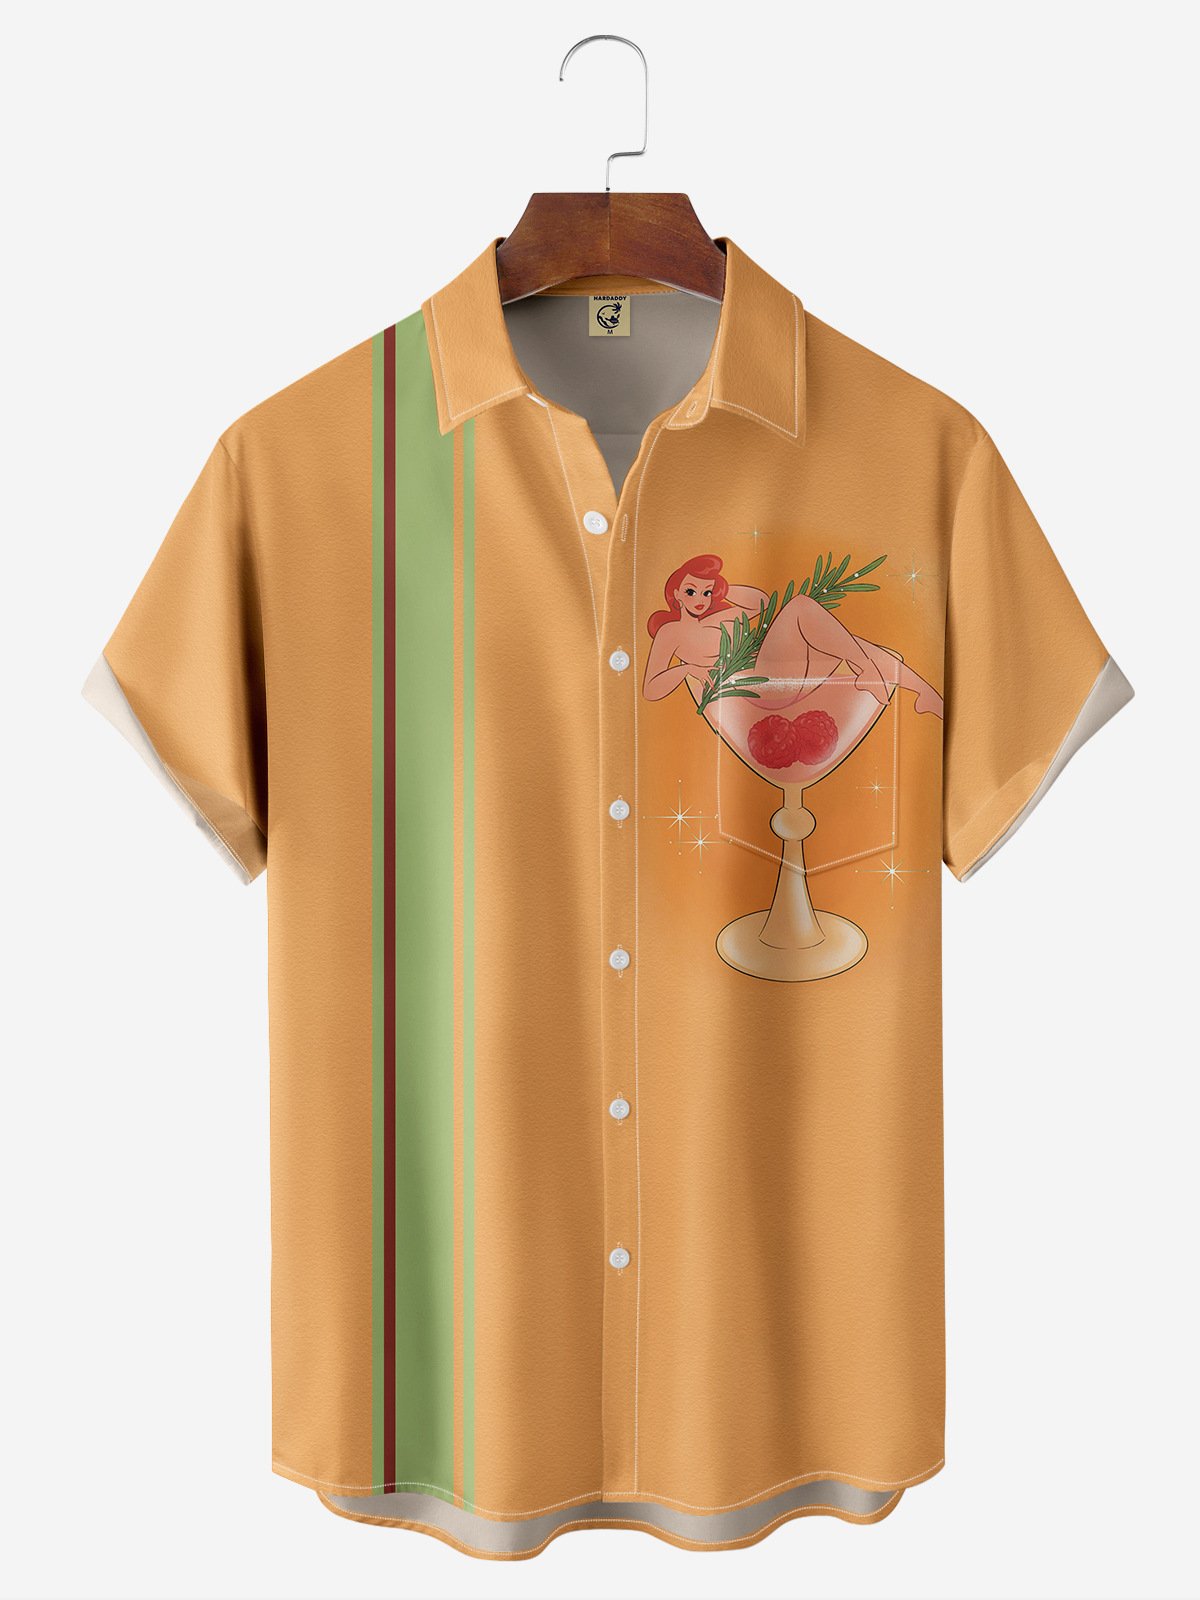 Cocktail Girl Bowling Shirt By Alice Meow